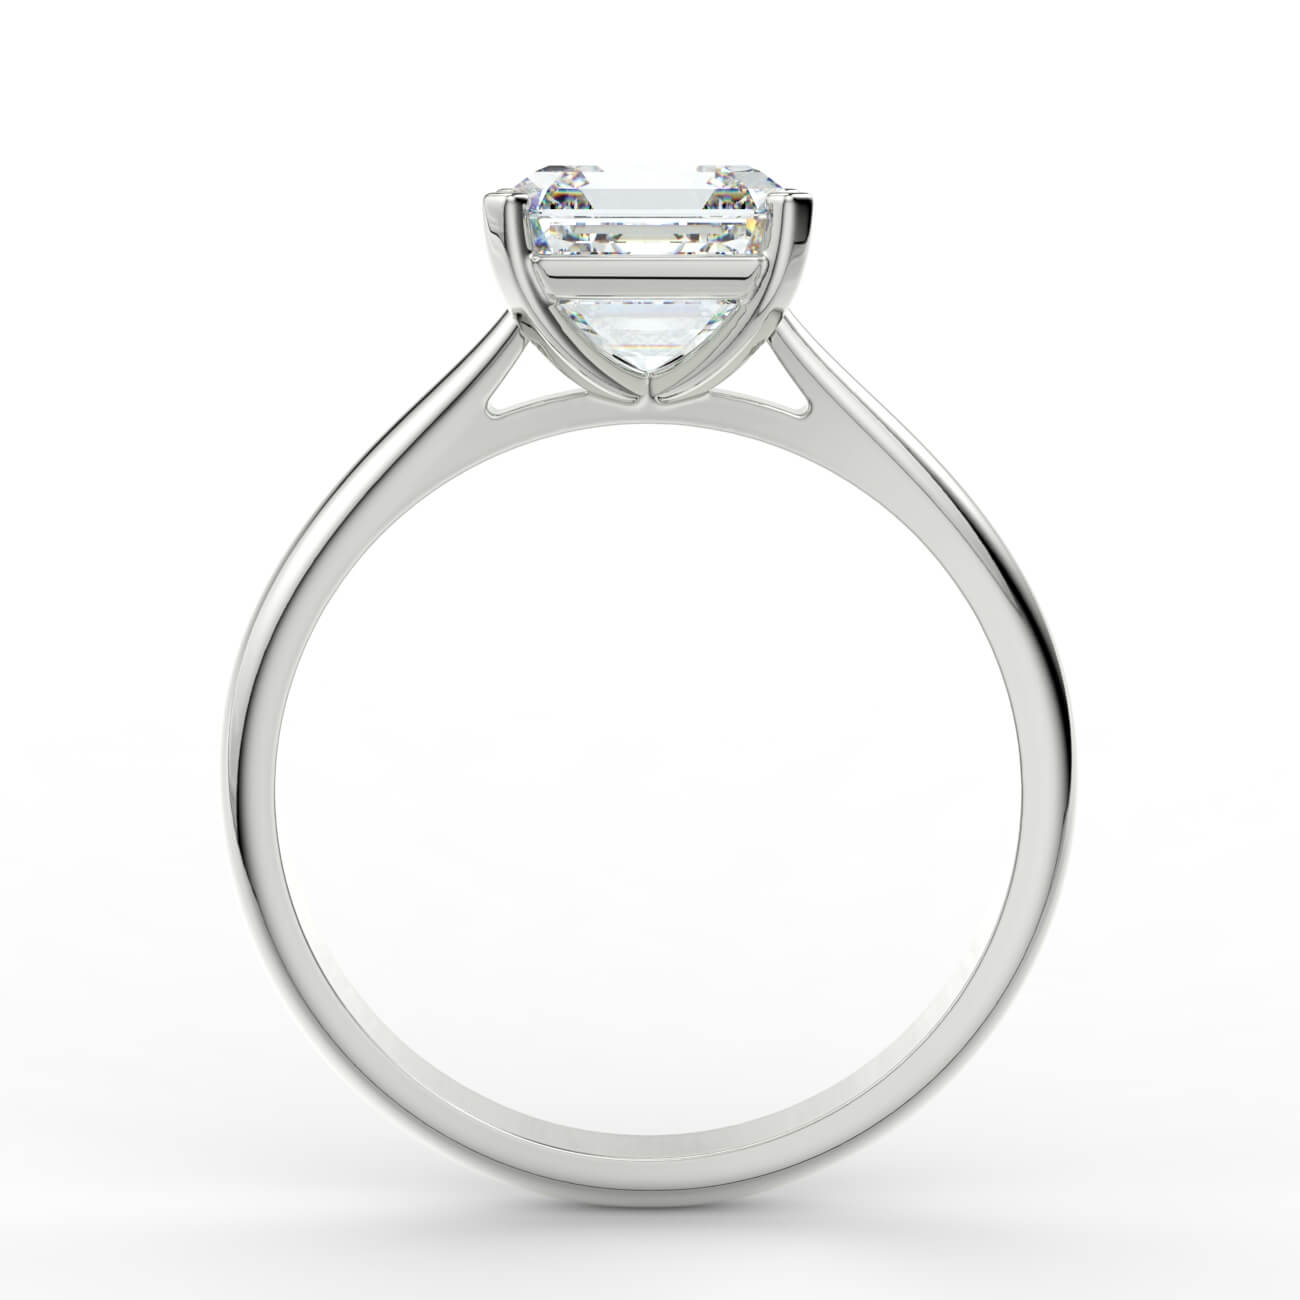 Asscher cut diamond cathedral engagement ring in white gold – Australian Diamond Network